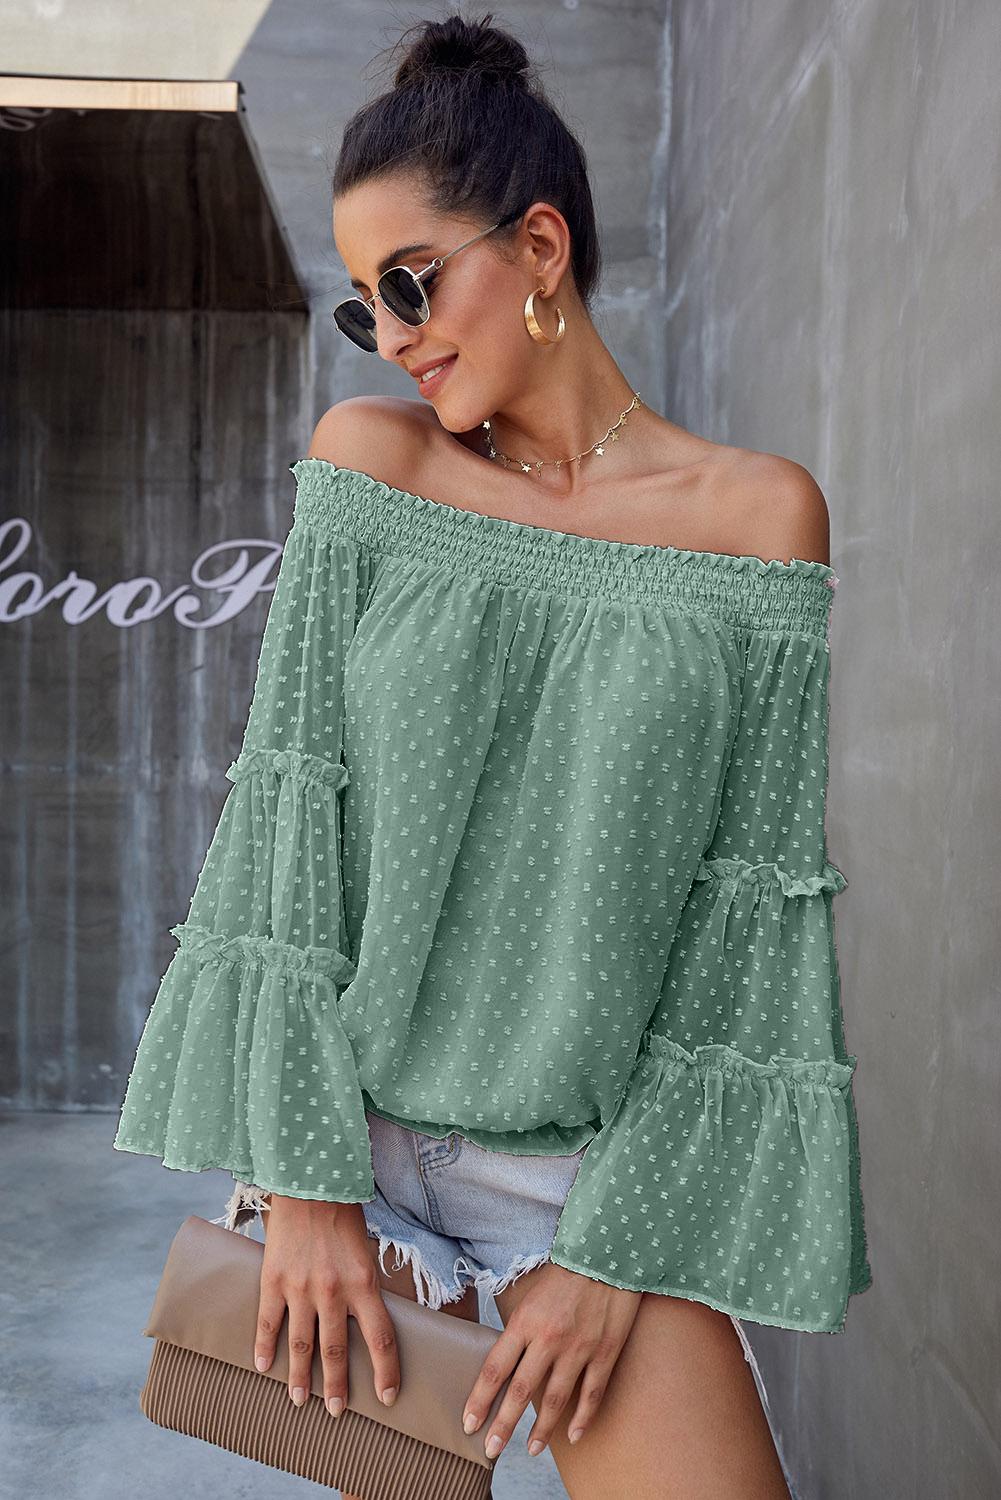 Blouse Chic a Pois Suisse Vert Manches Longues Epaule Denudee